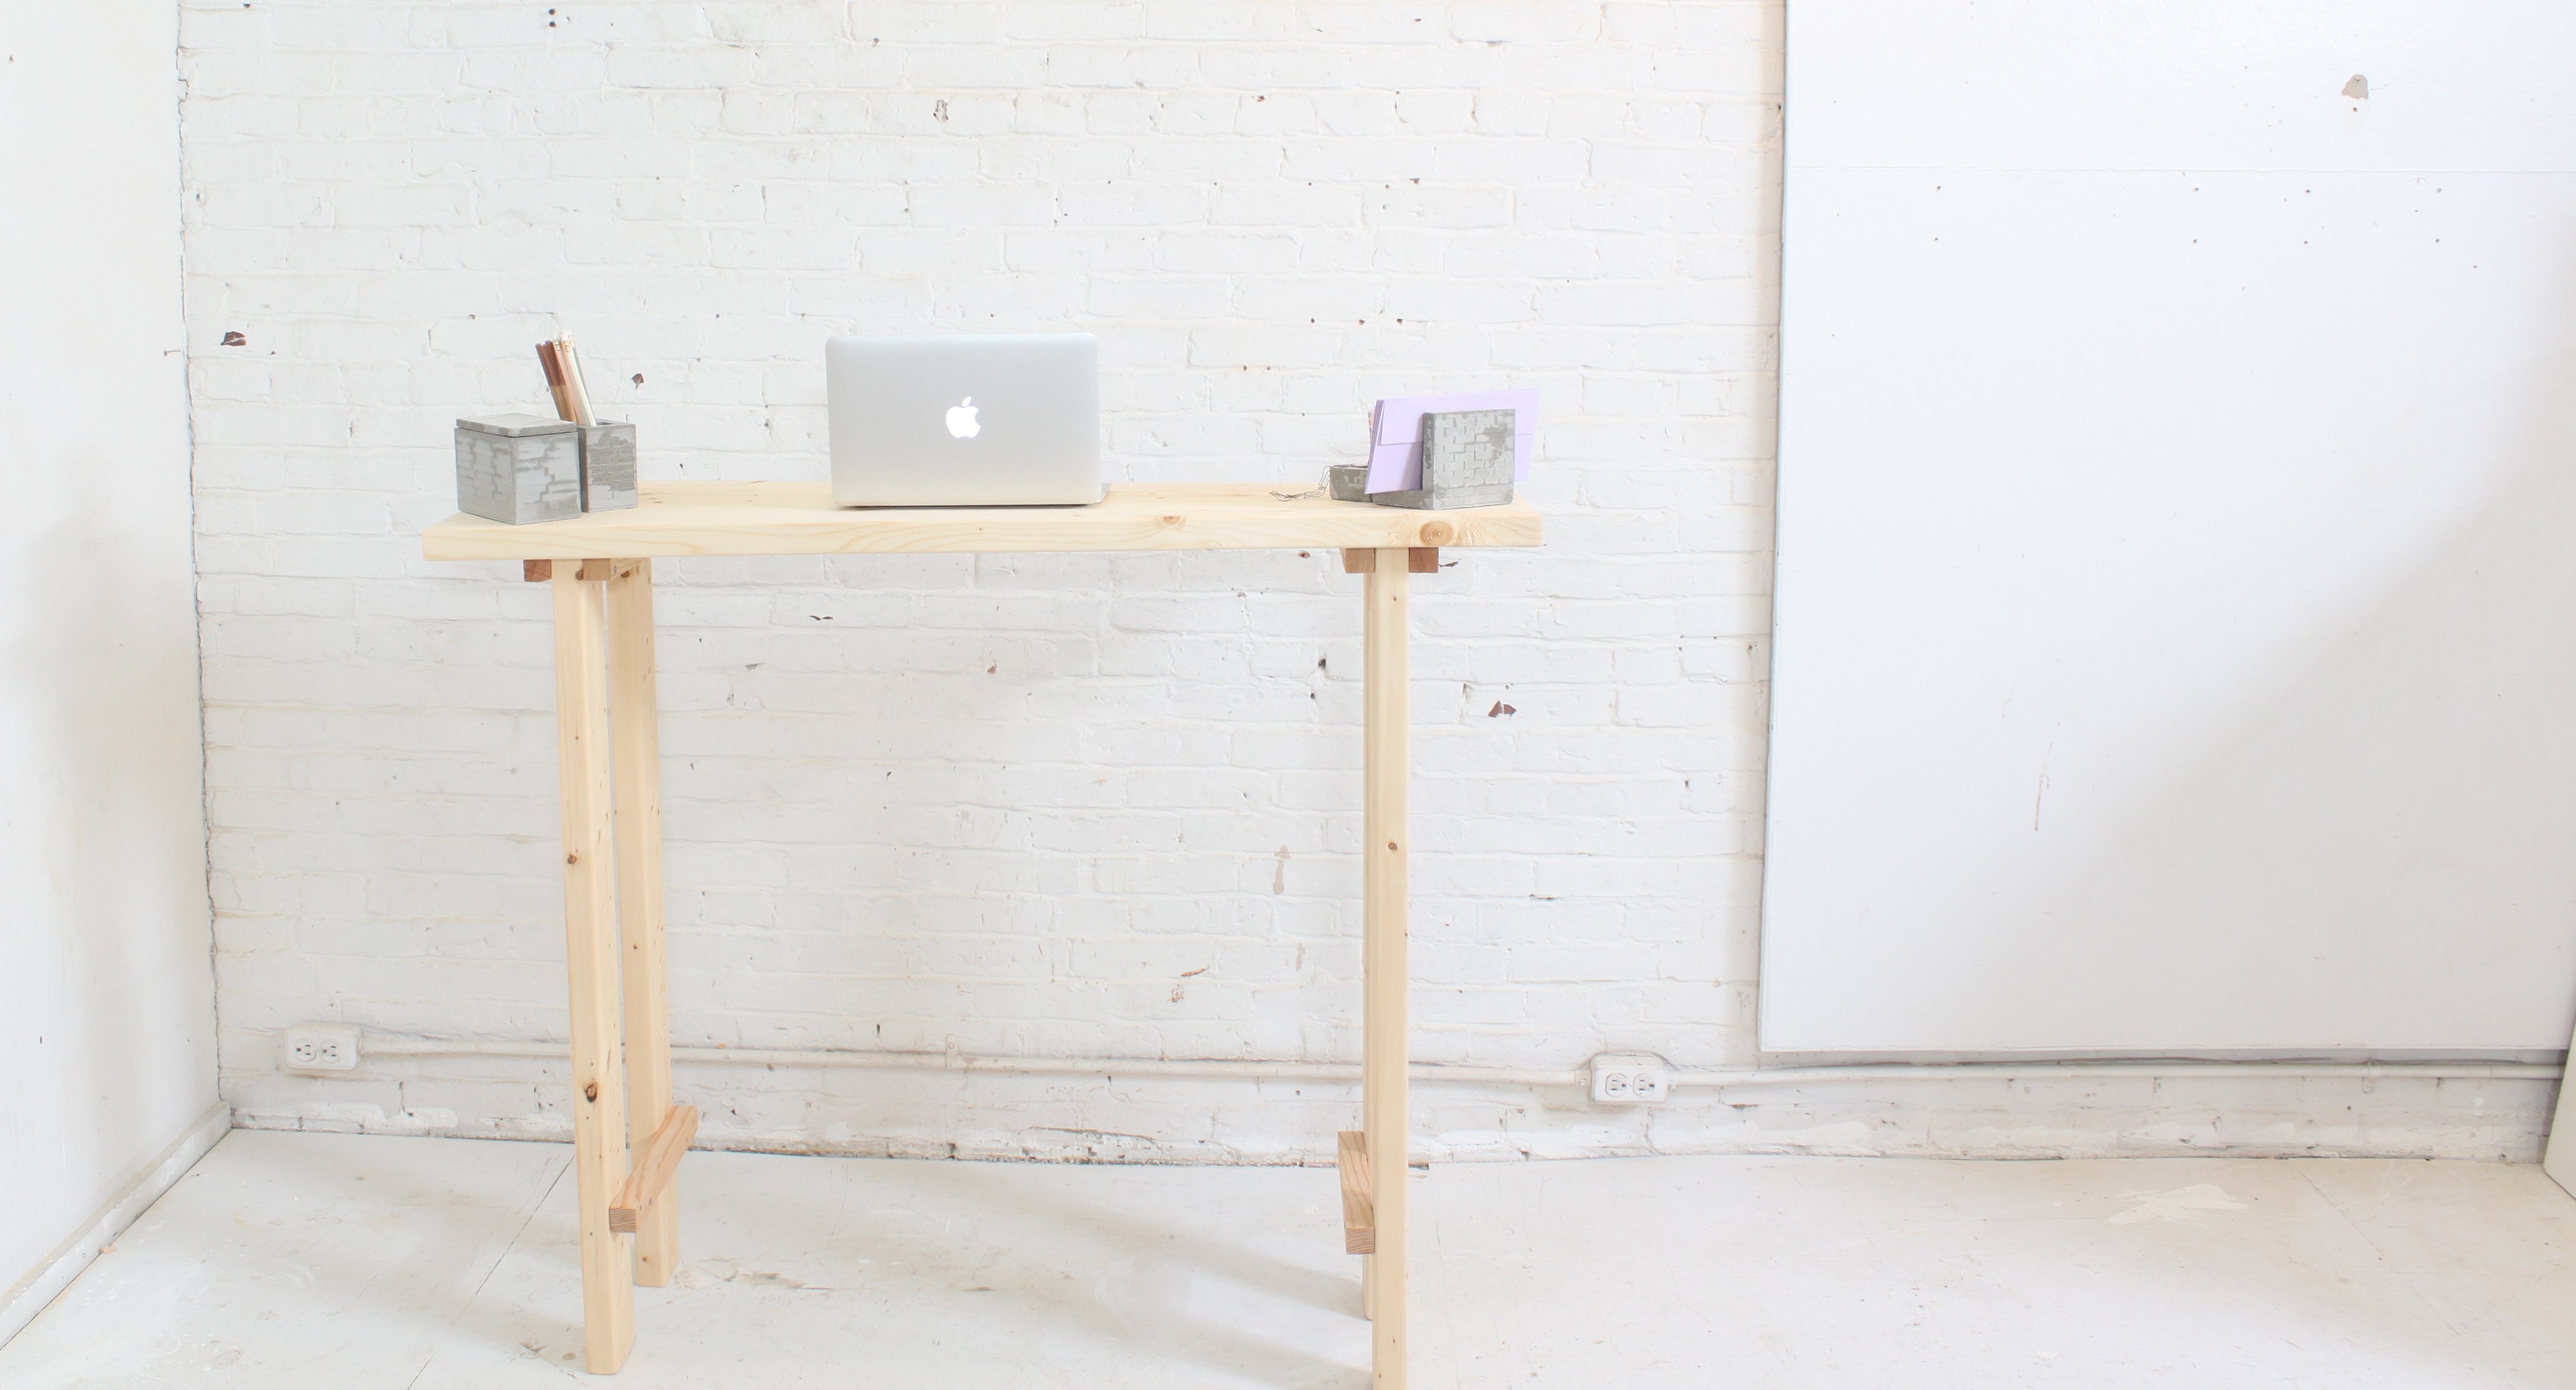 How to Make a Standing Desk | eHow